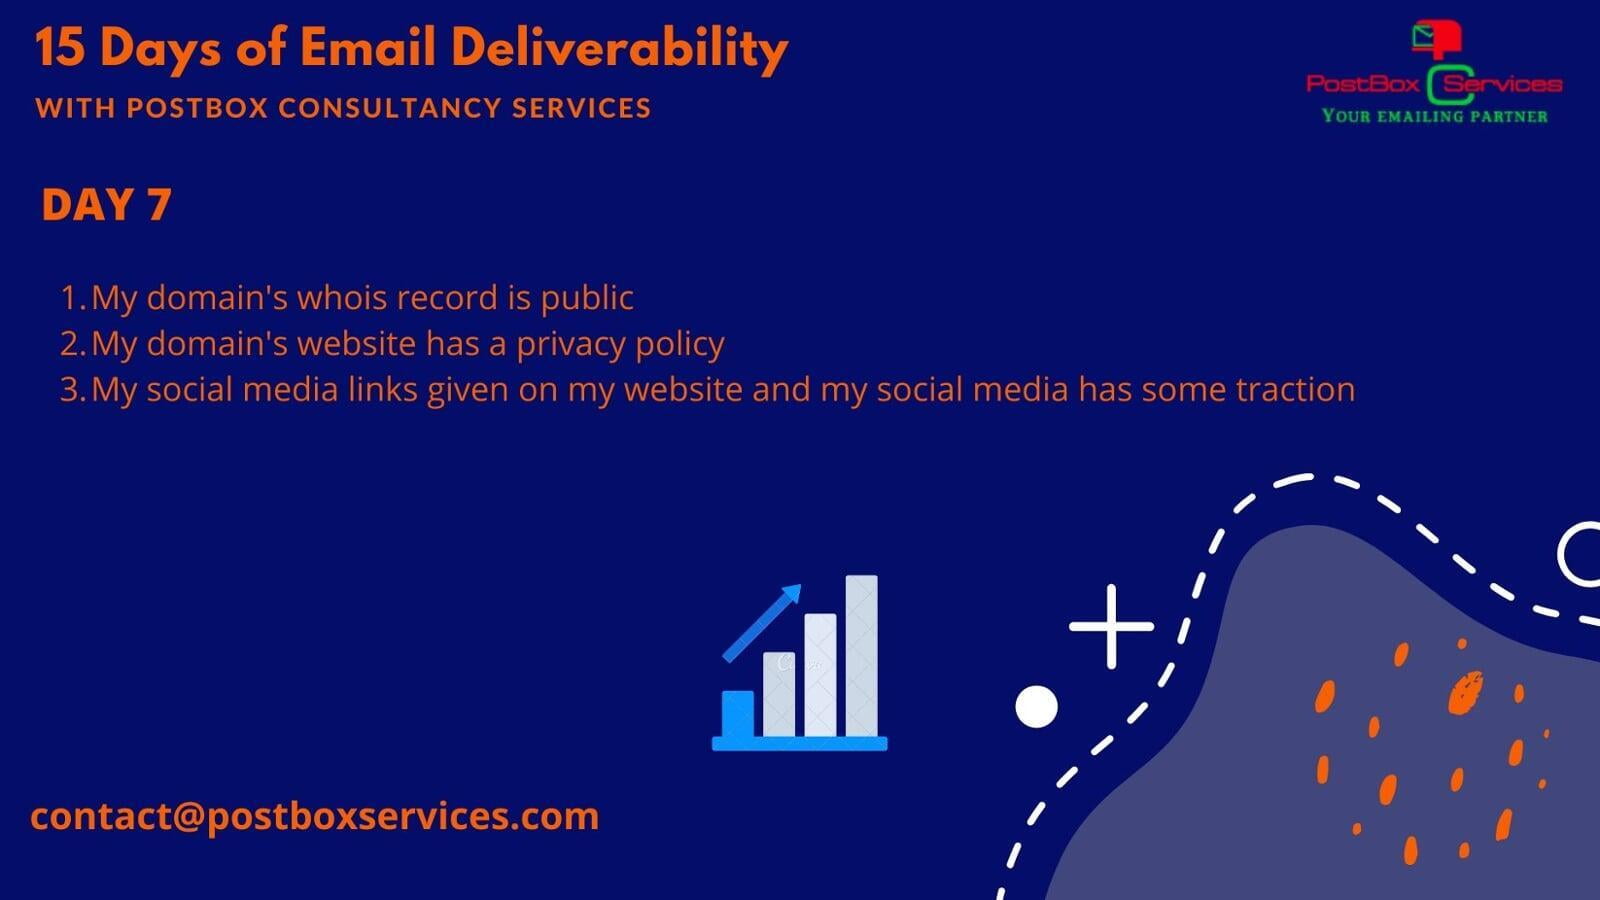 Day 7 Email Deliverability